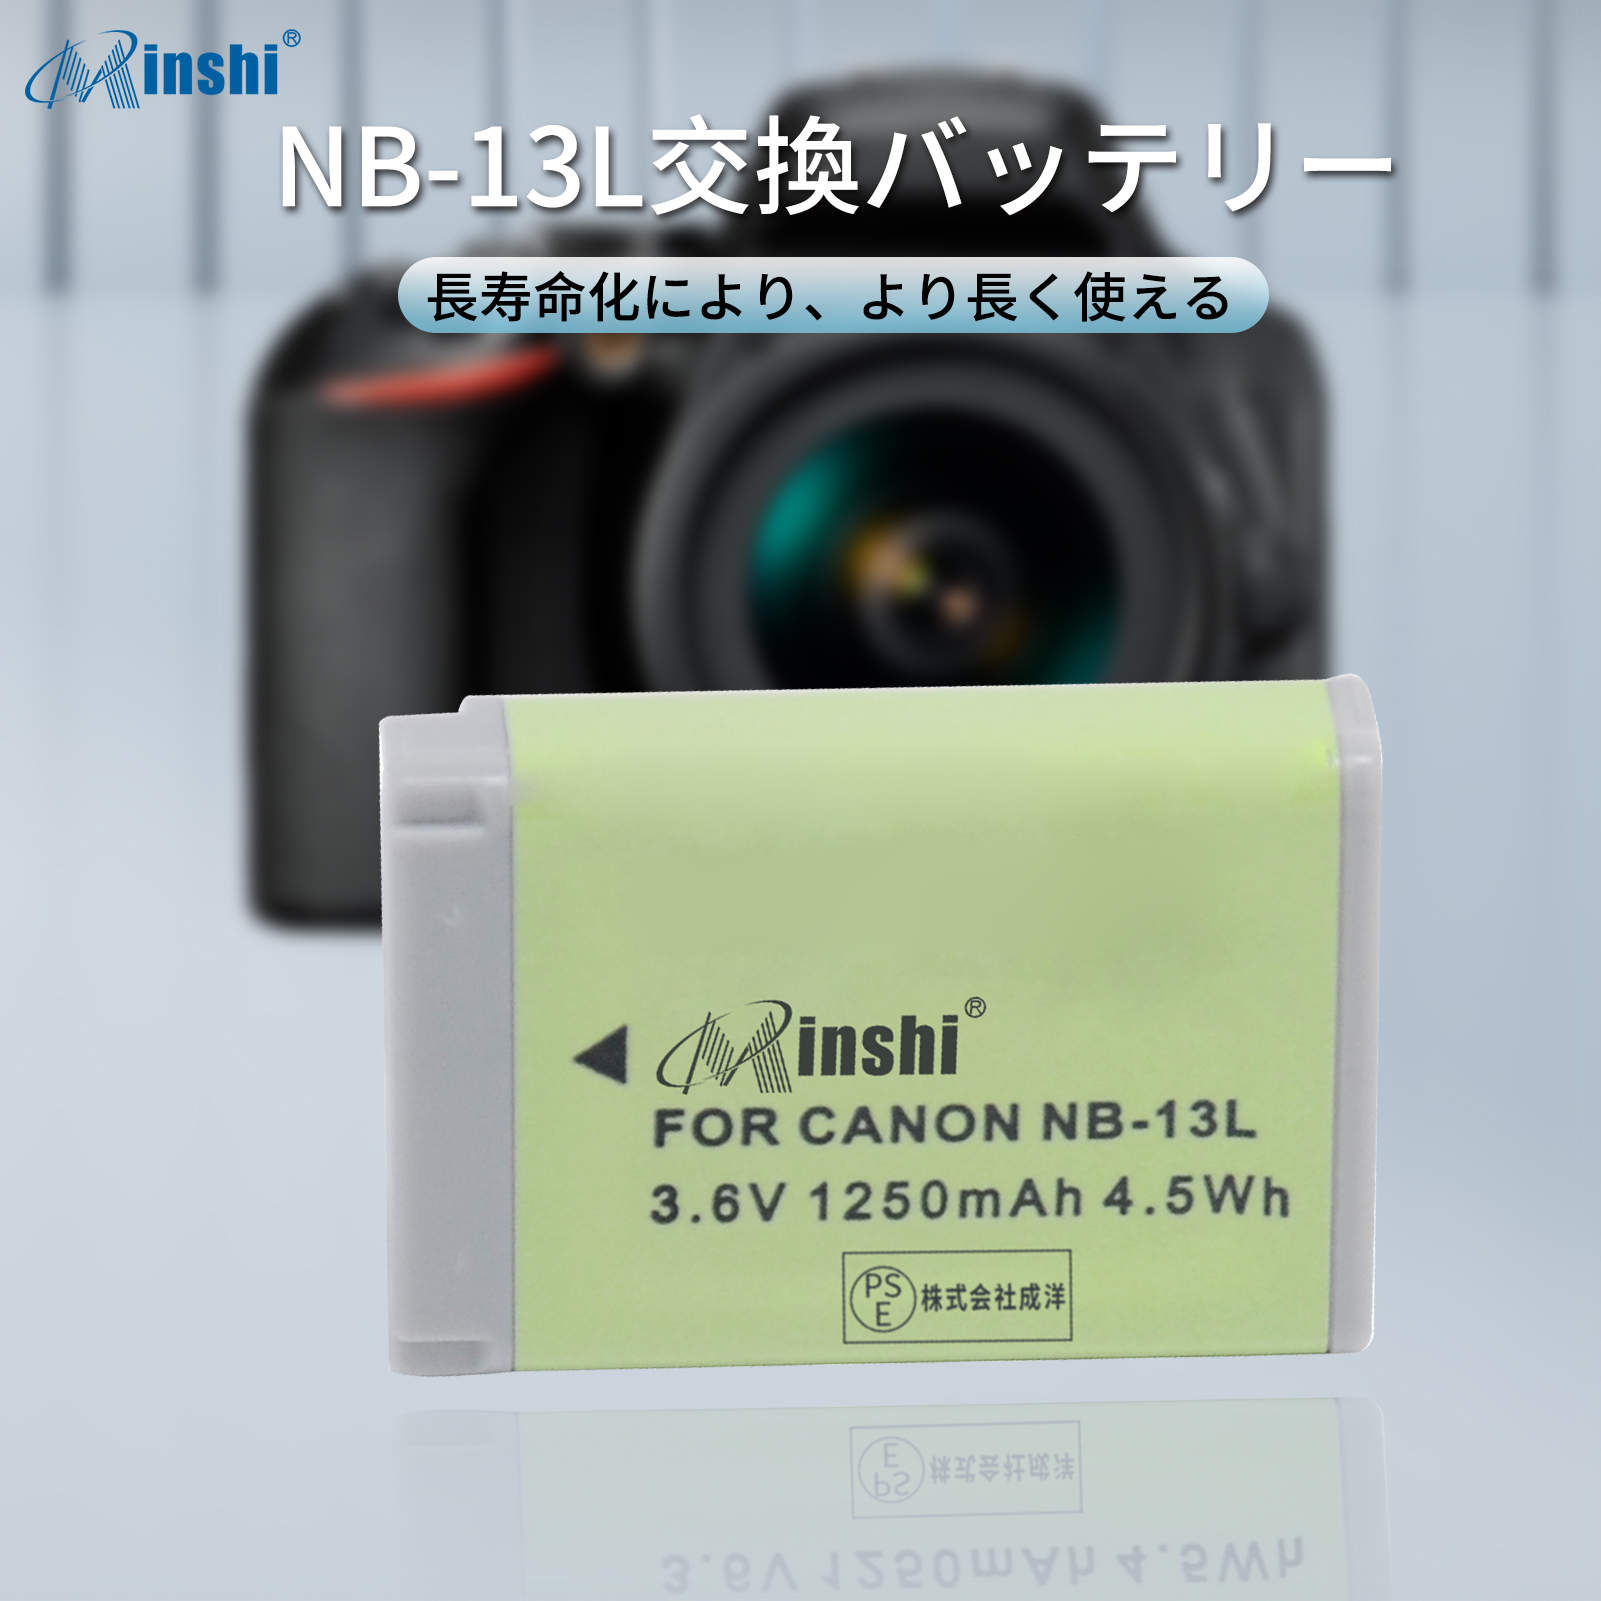 CANON NB-13L バッテリー